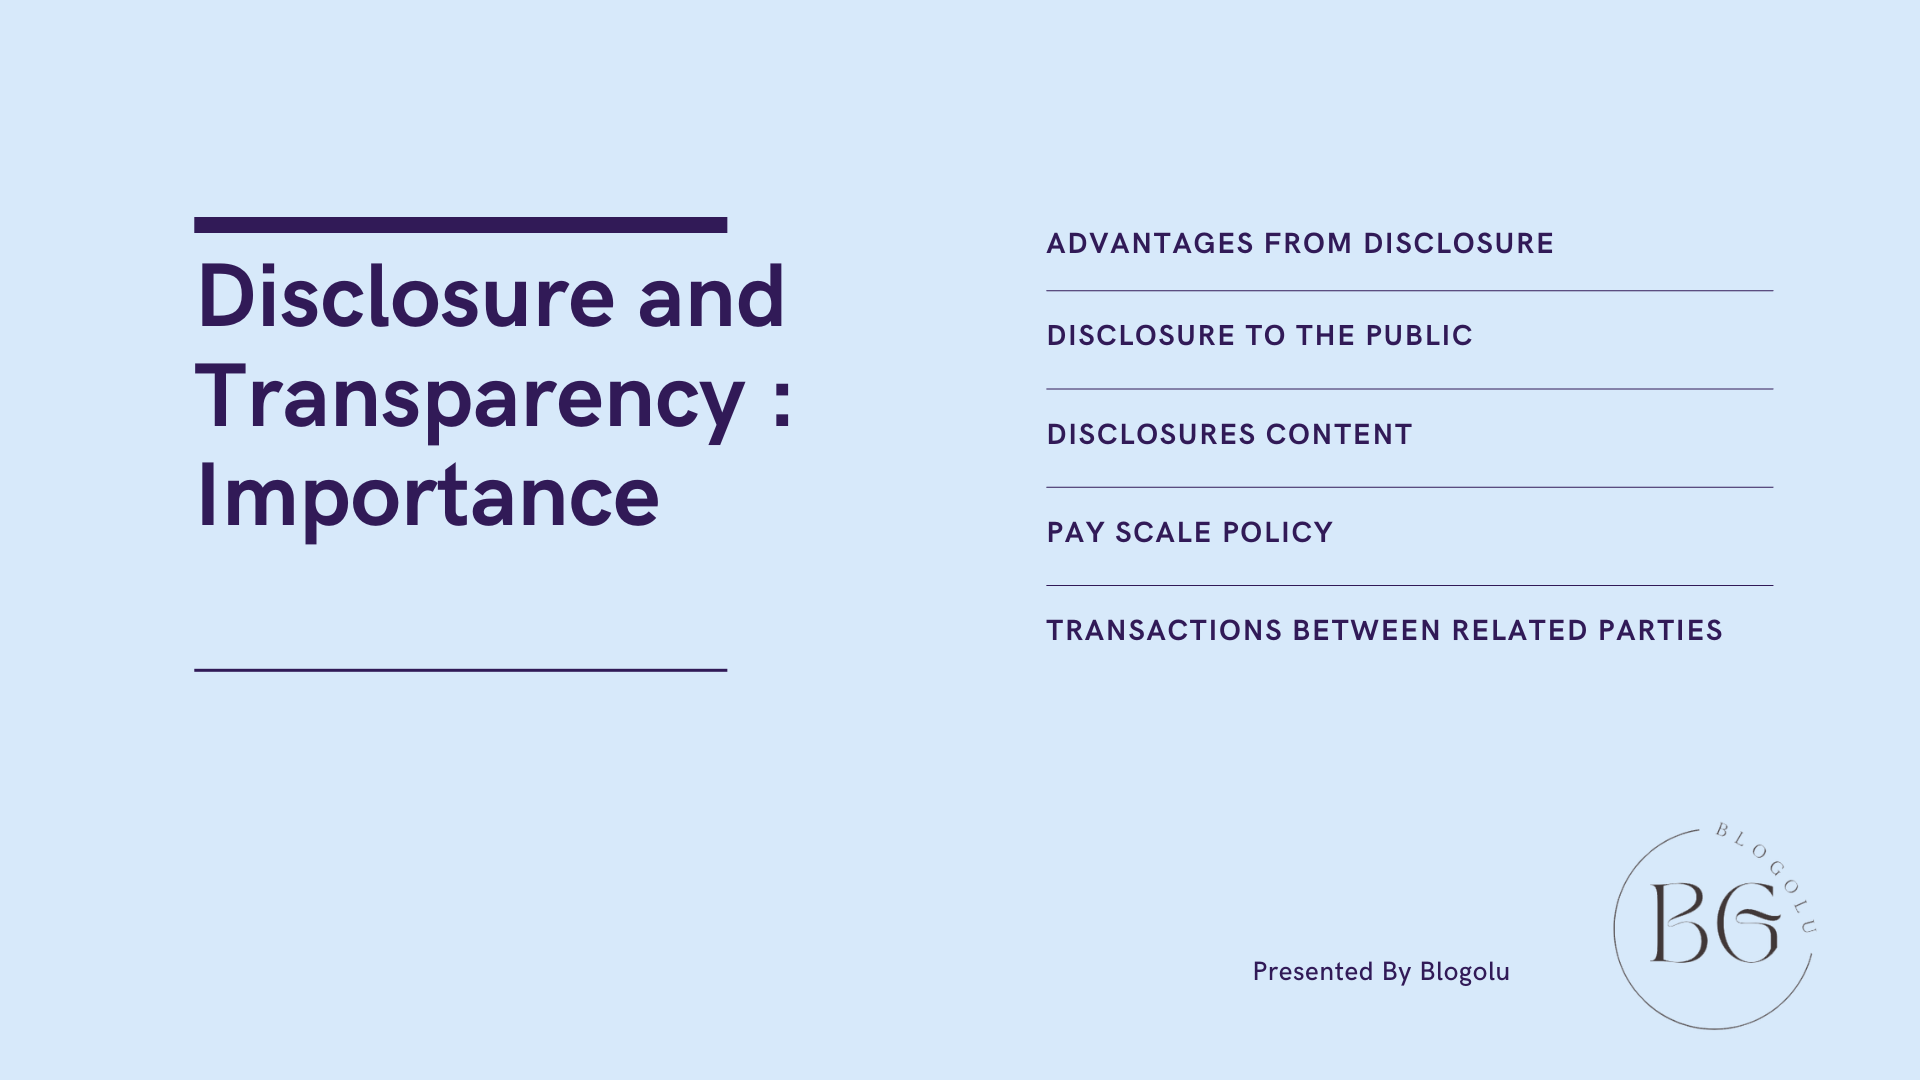 Disclosure and Transparency : Importance